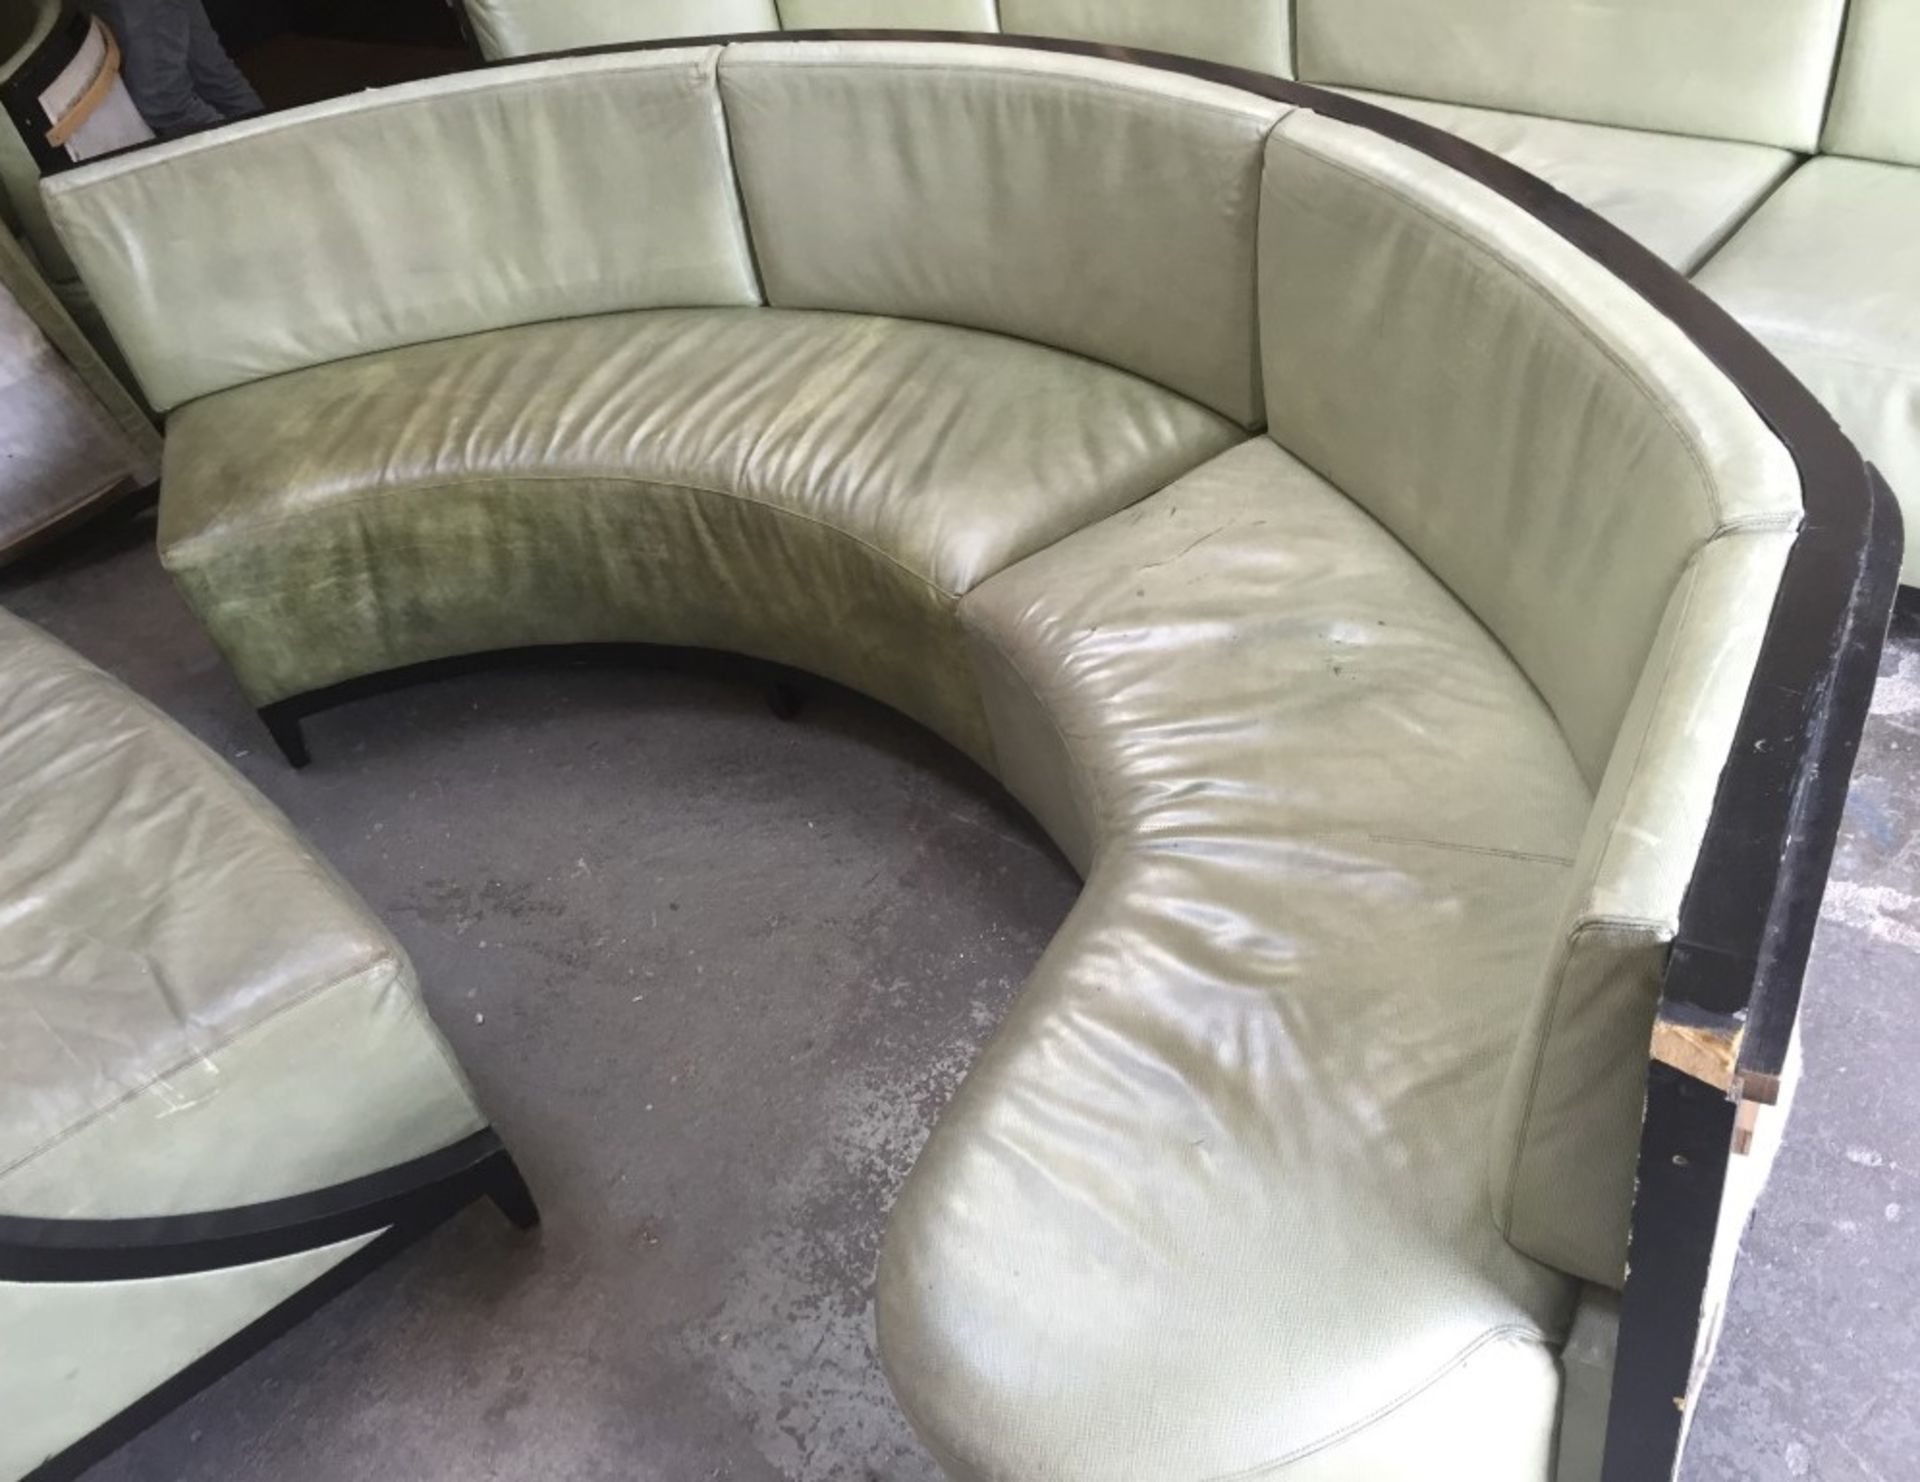 1 x Luxury Upholstered Curved Seating Area - Recently Removed From Nobu - Dimensions: W285 x D62cm x - Image 2 of 23